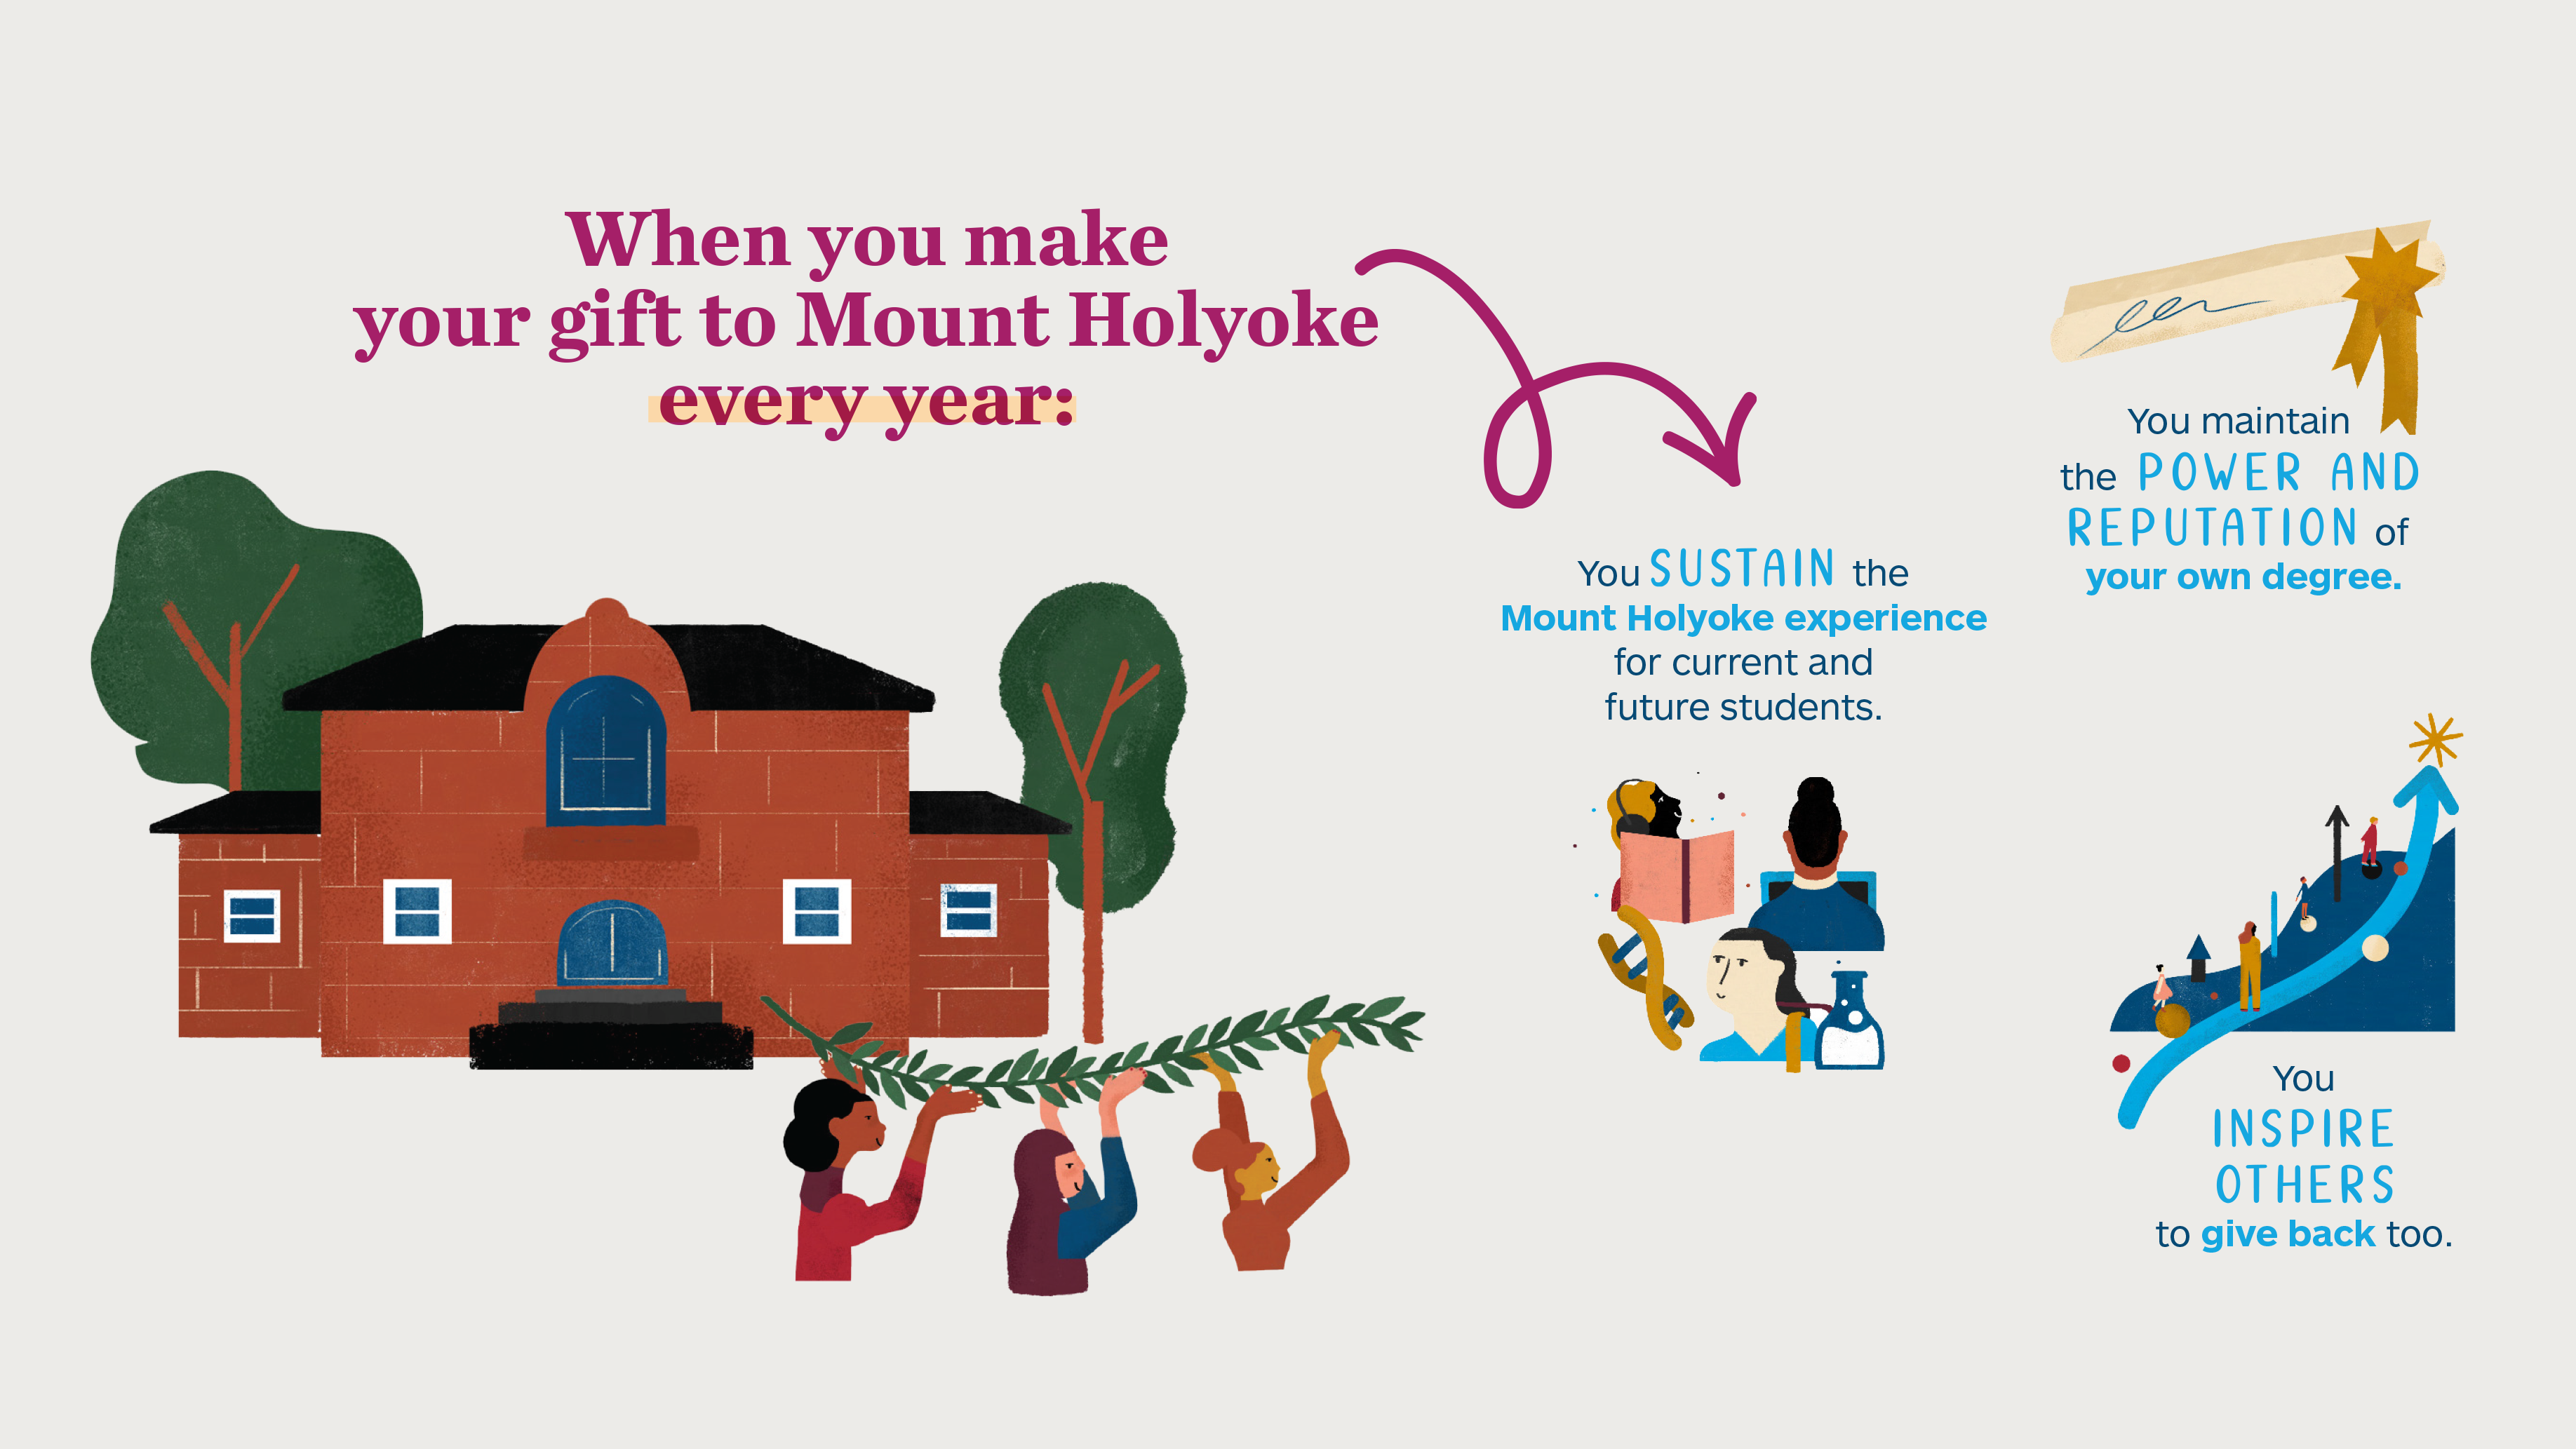 When you make your gift to Mount Holyoke every year: You sustain the experience for current and future students, you maintain the power of reputaion of your own degree and you inspire others.